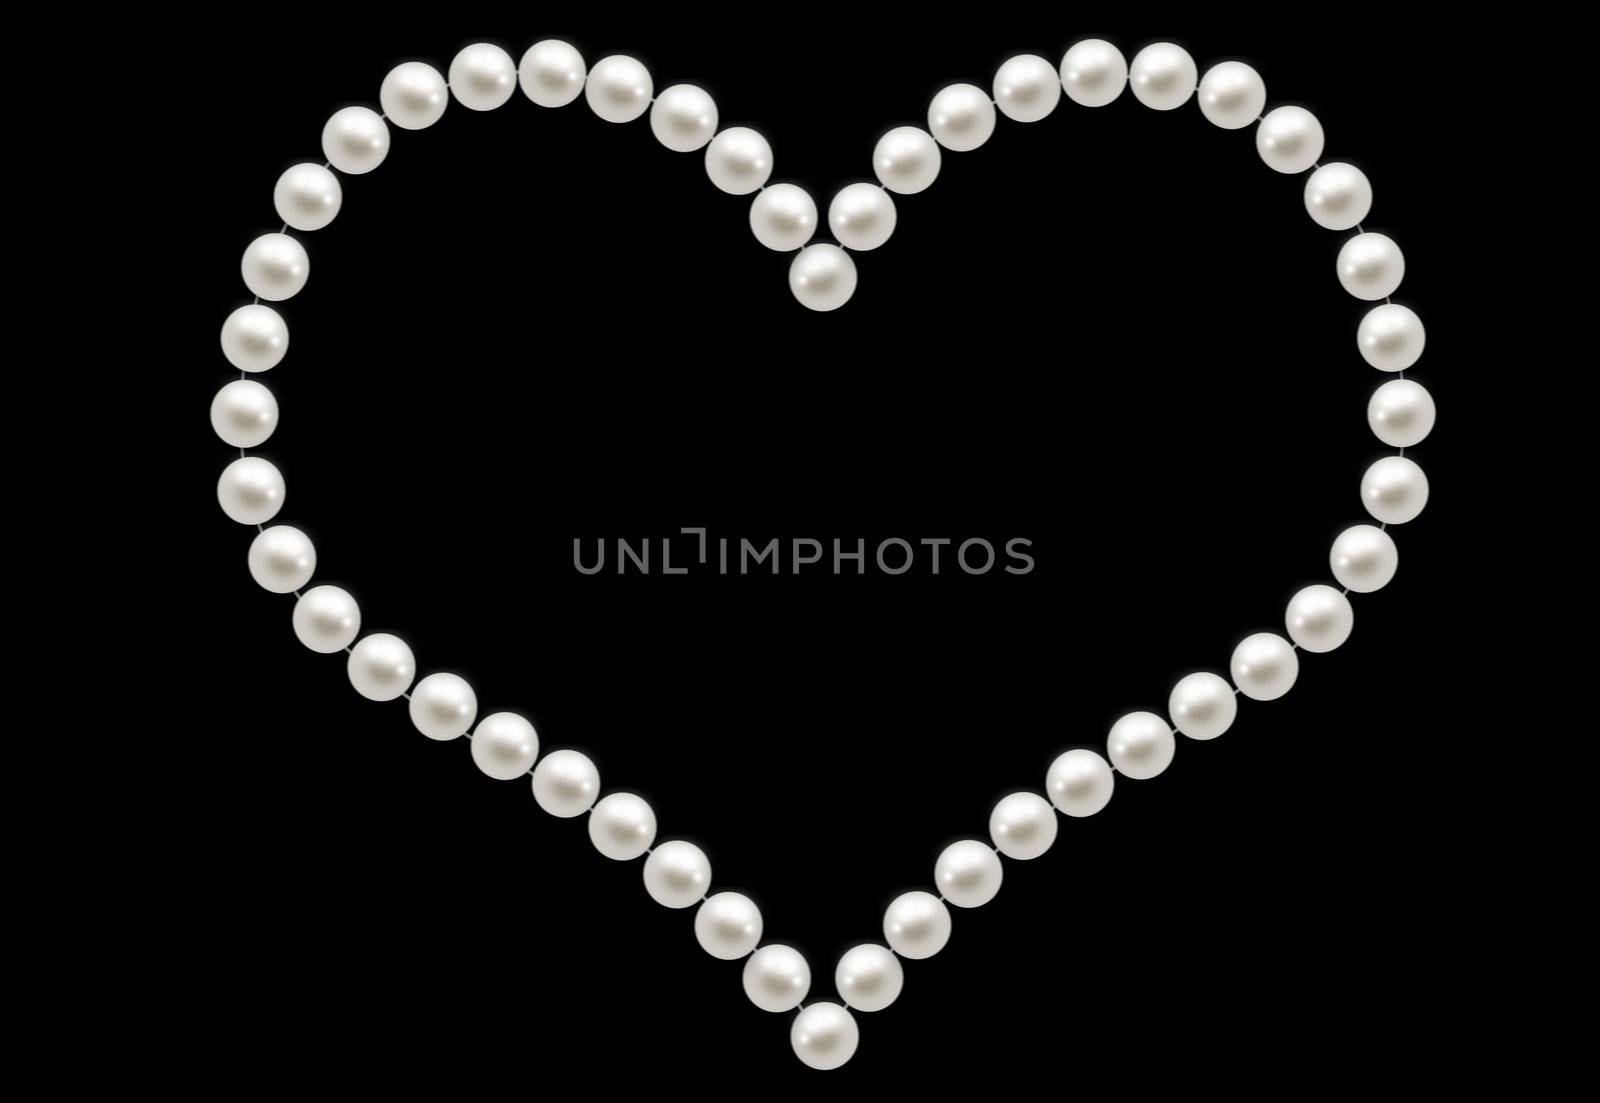 Nice image with shining white pearls like a heart